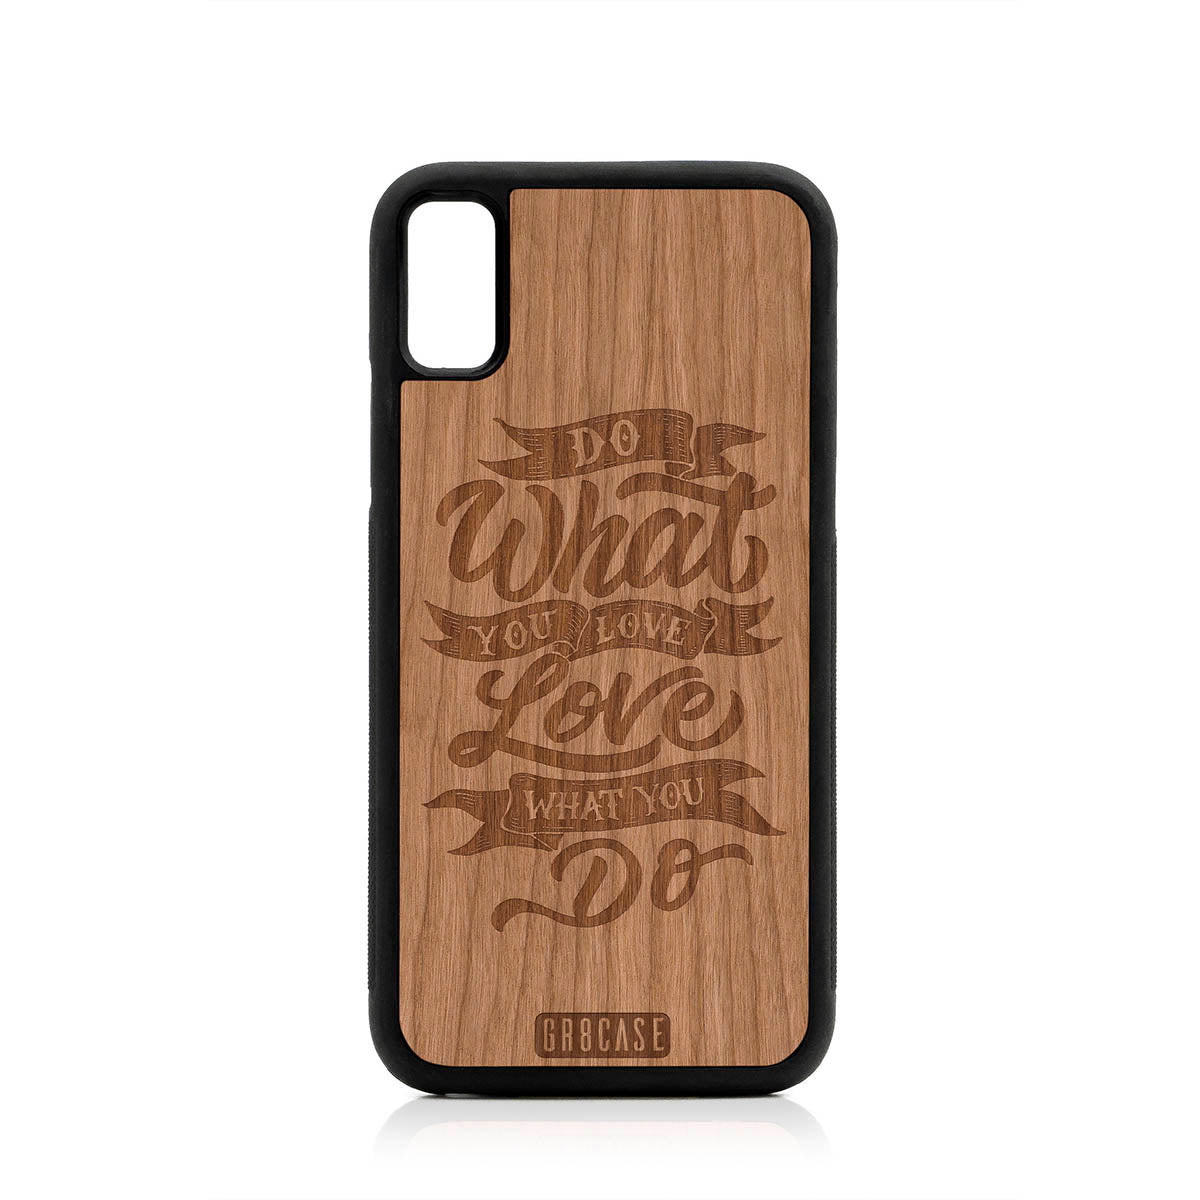 Do What You Love Love What You Do Design Wood Case For iPhone XS Max by GR8CASE